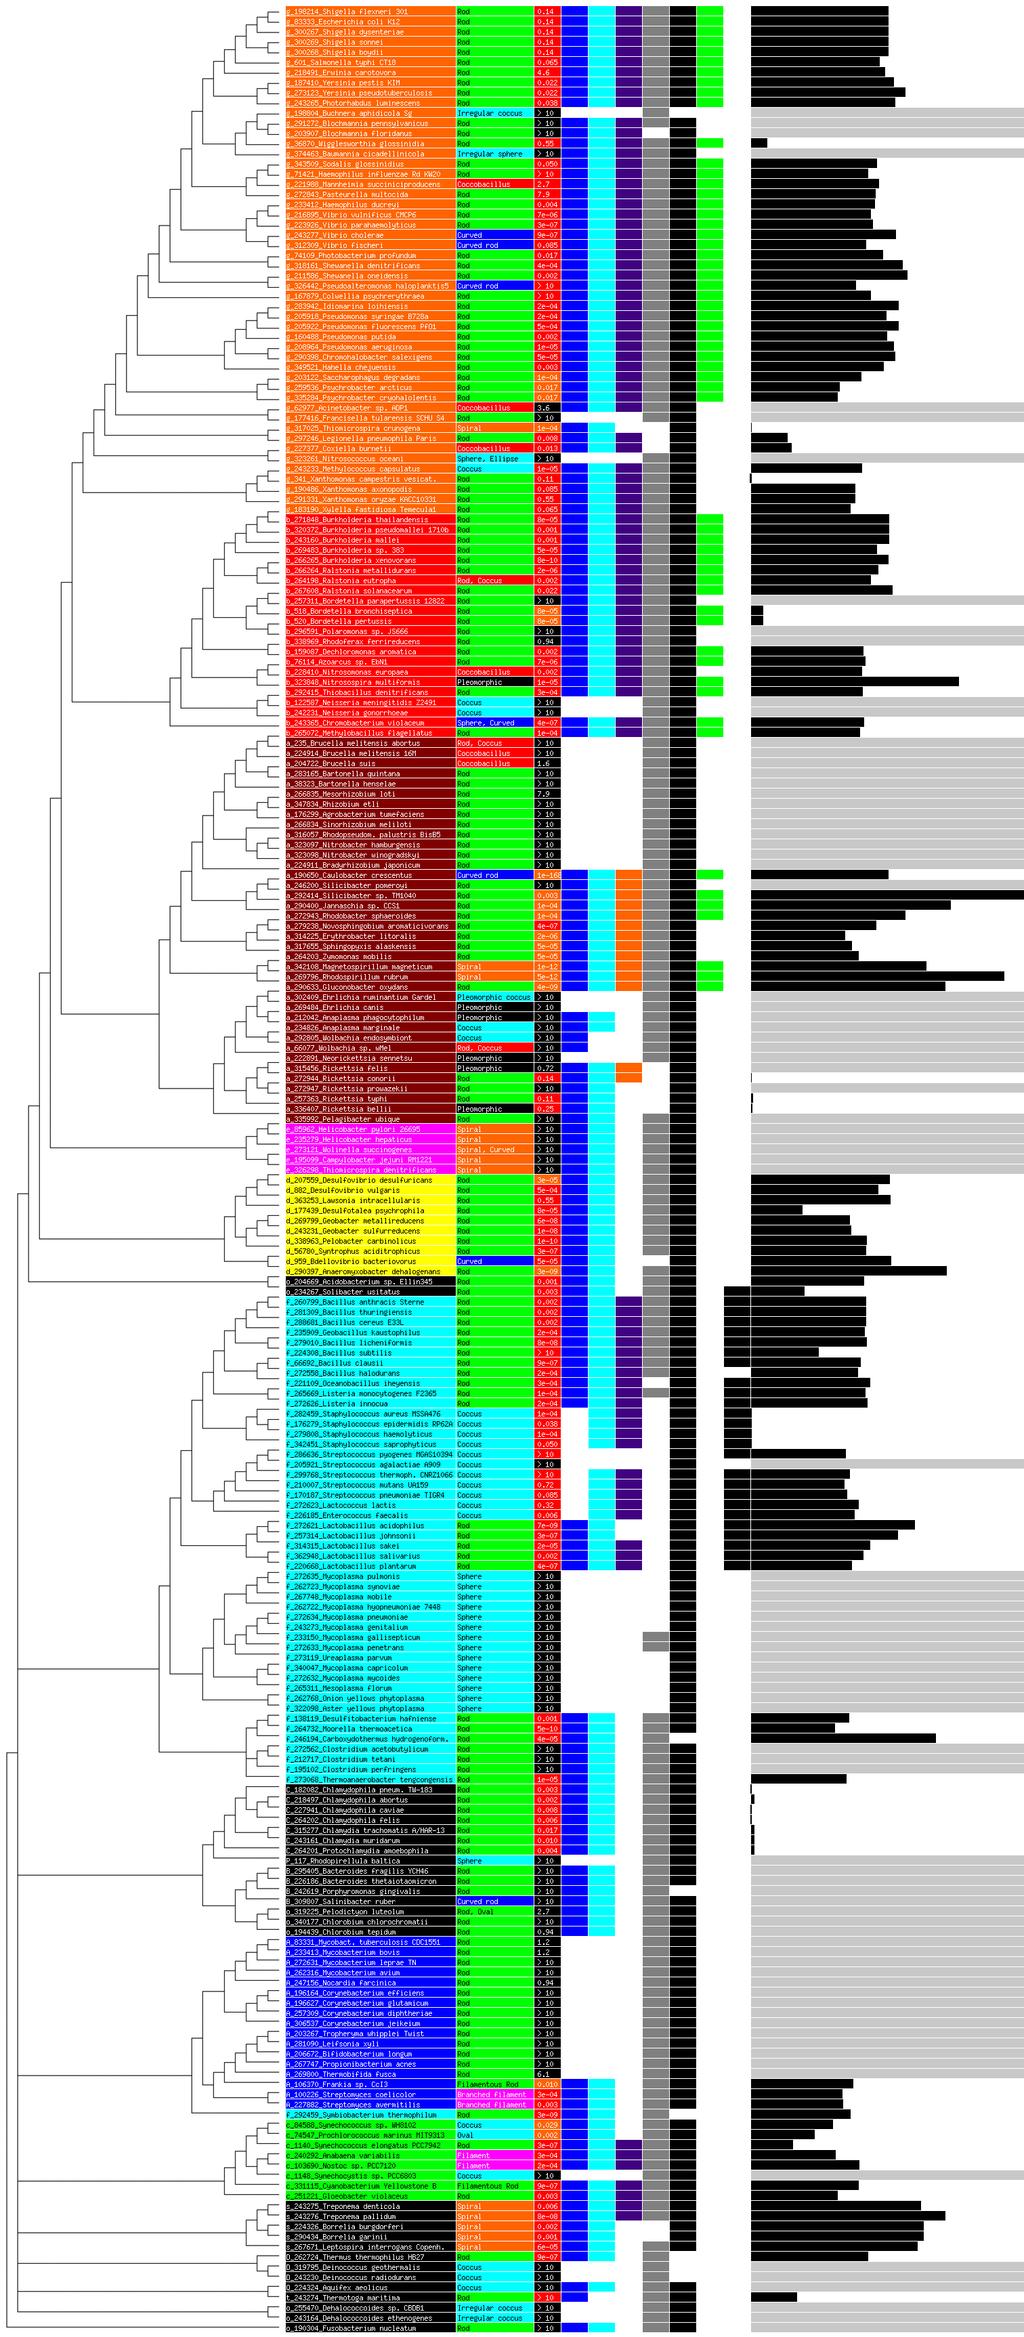 Fig. S5. Phylogenetic tree of bacterial species annotated with information pertinent to RodZ. (Column 1) National Center for Biotechnology Information Taxonomy ID and species name.